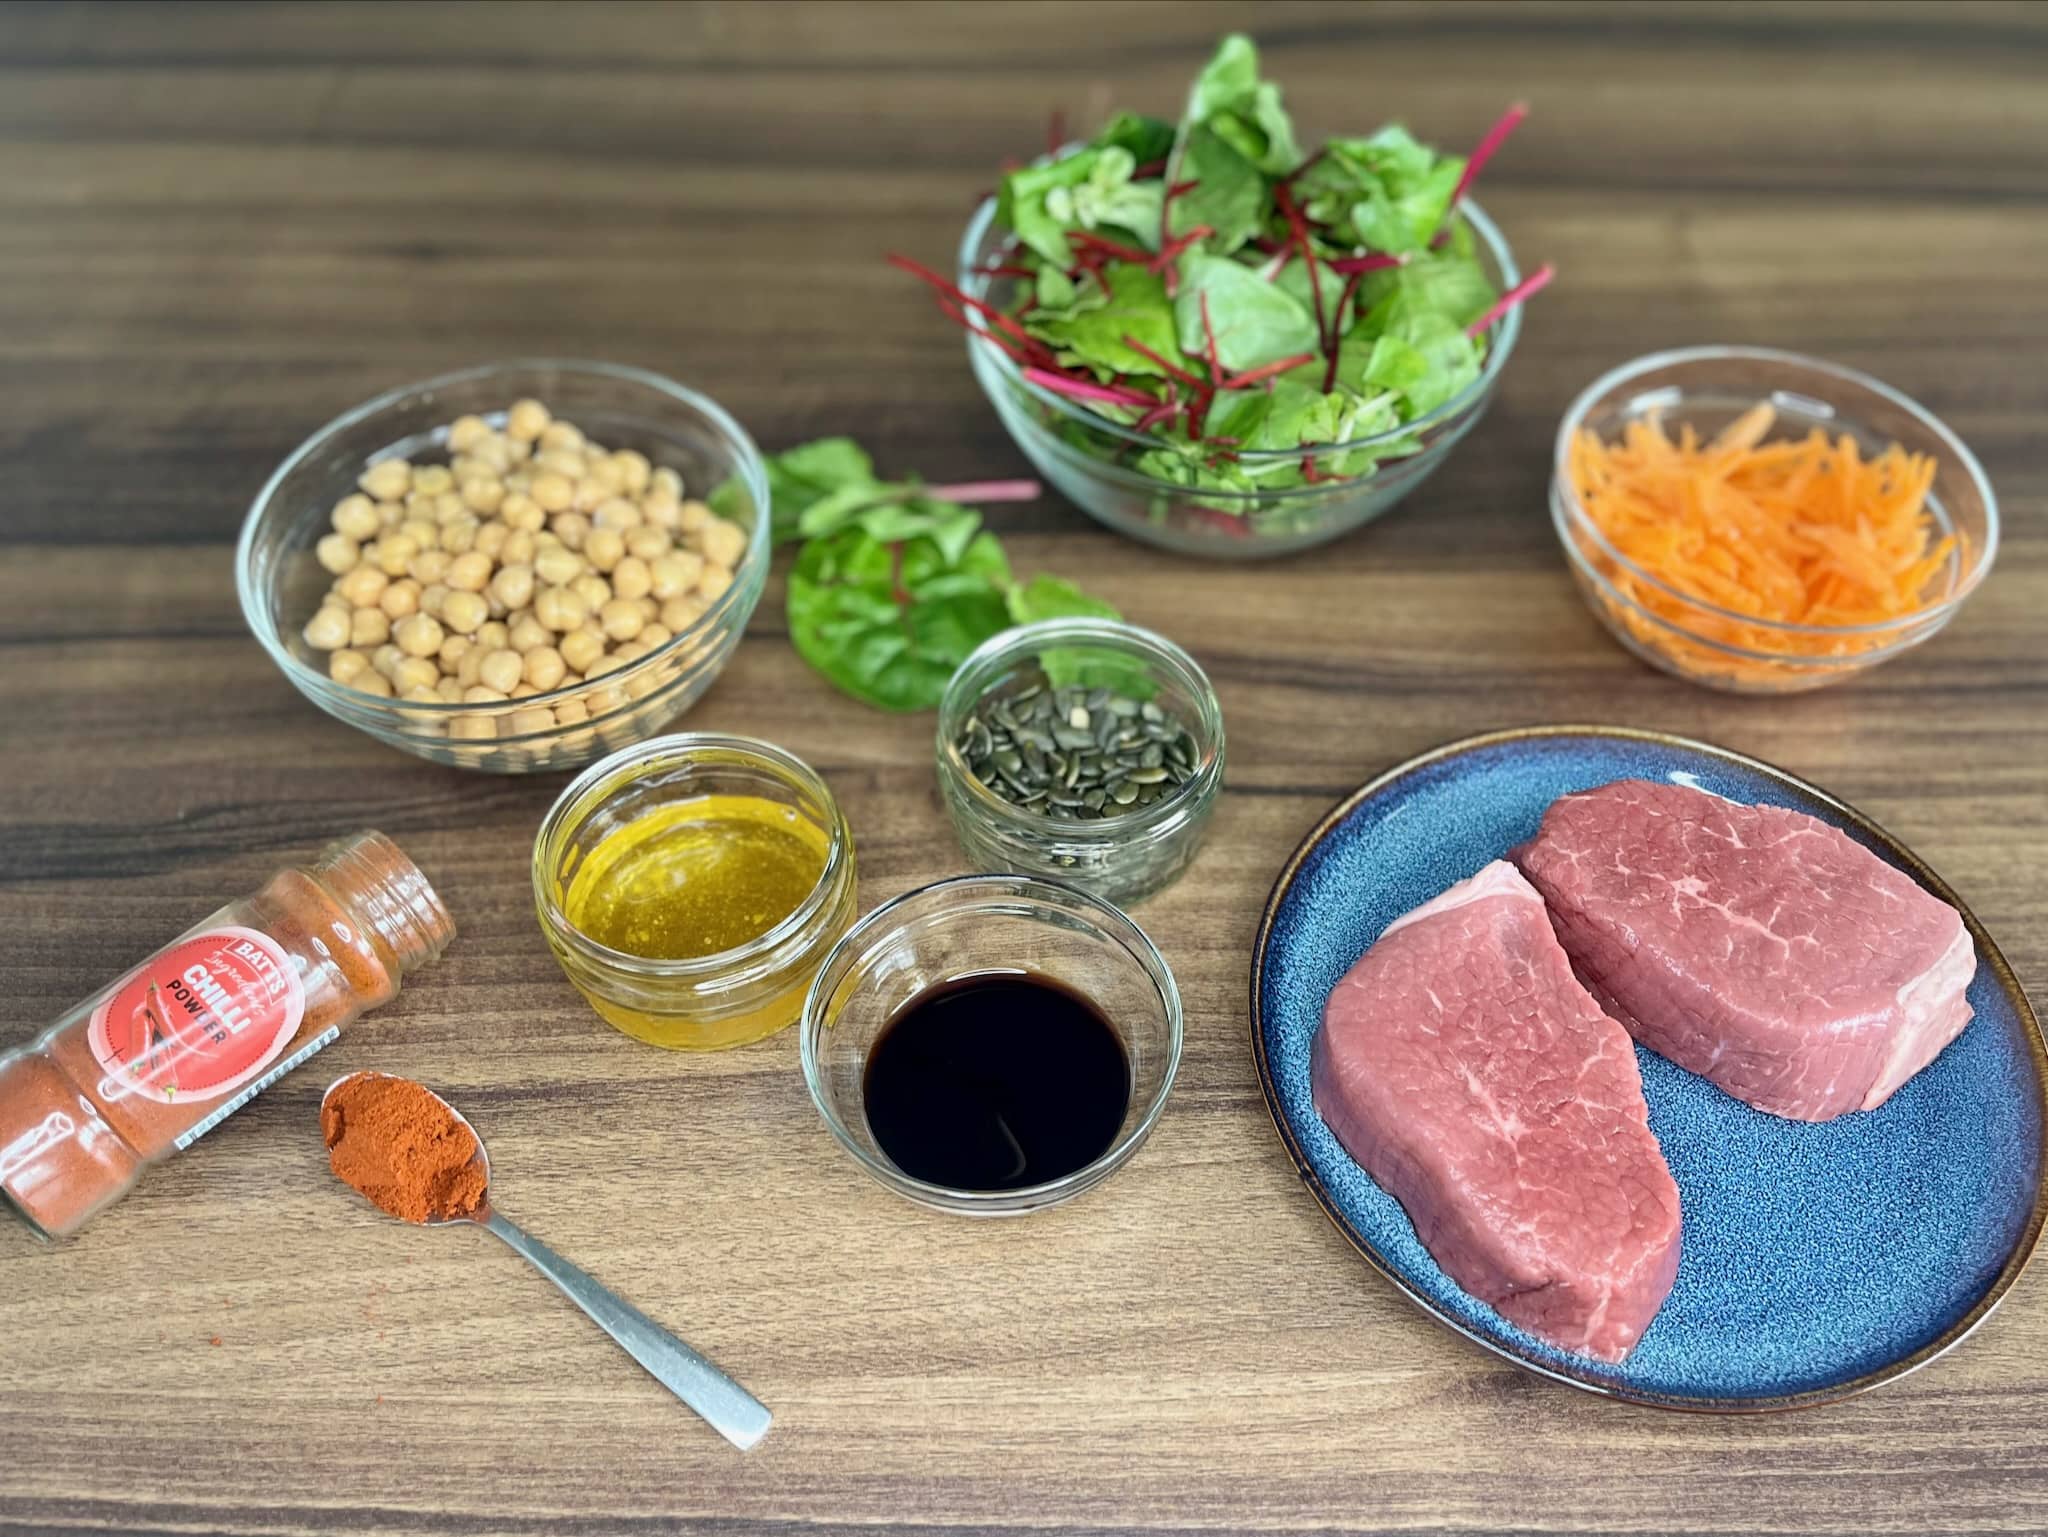 All of the ingredients are on the table, ready to be used to make a Steak and Chickpea Superfood Salad